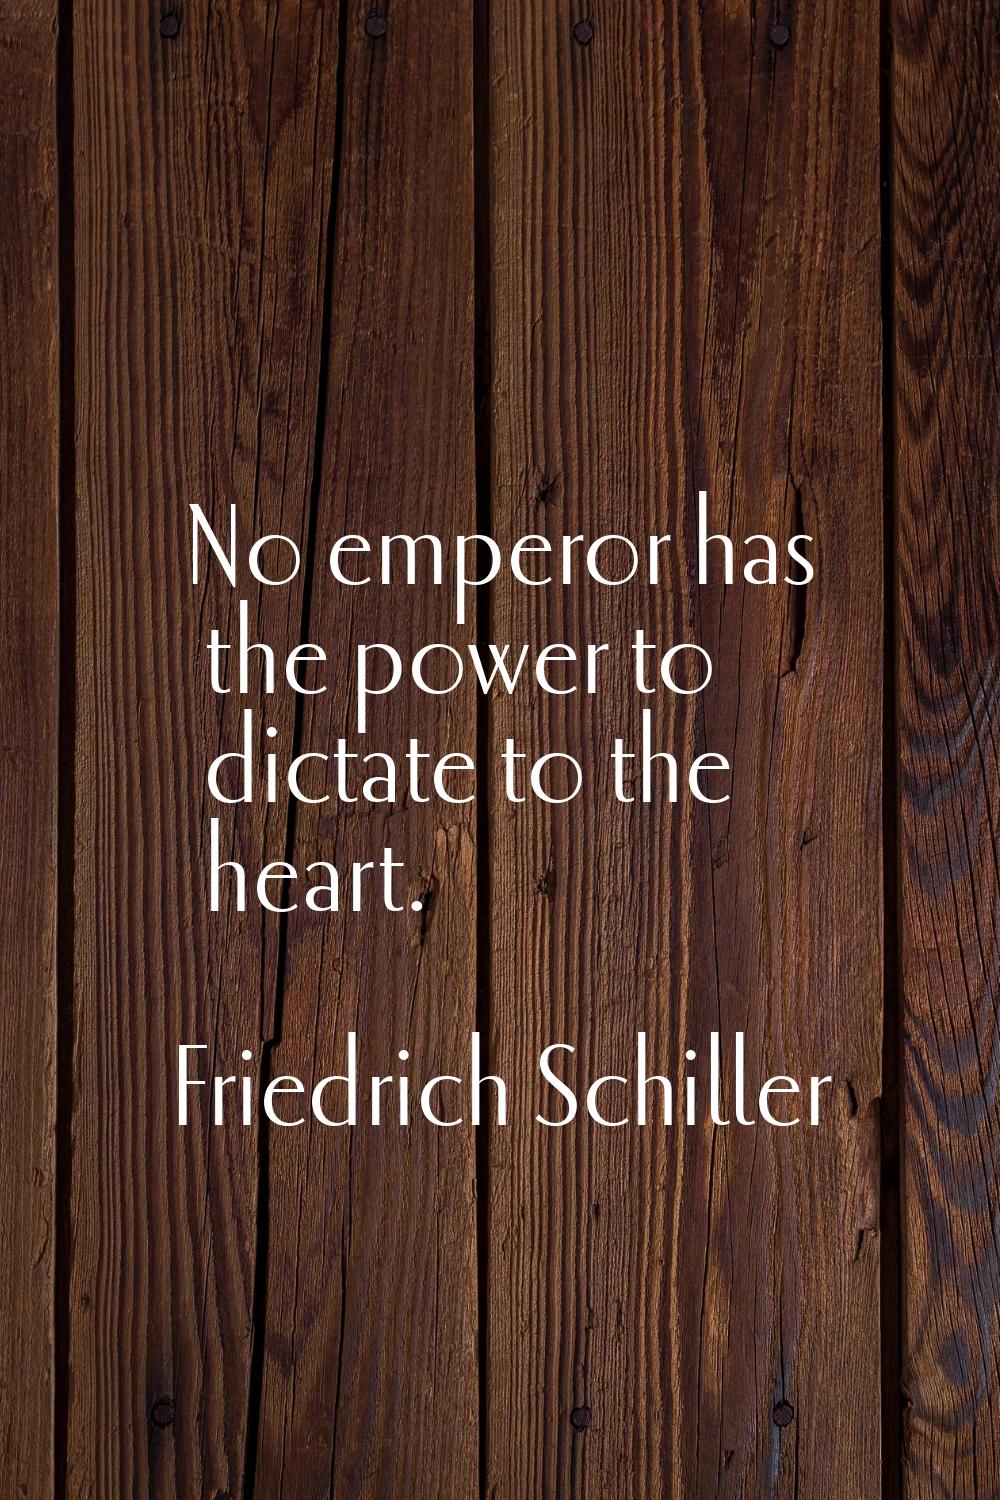 No emperor has the power to dictate to the heart.